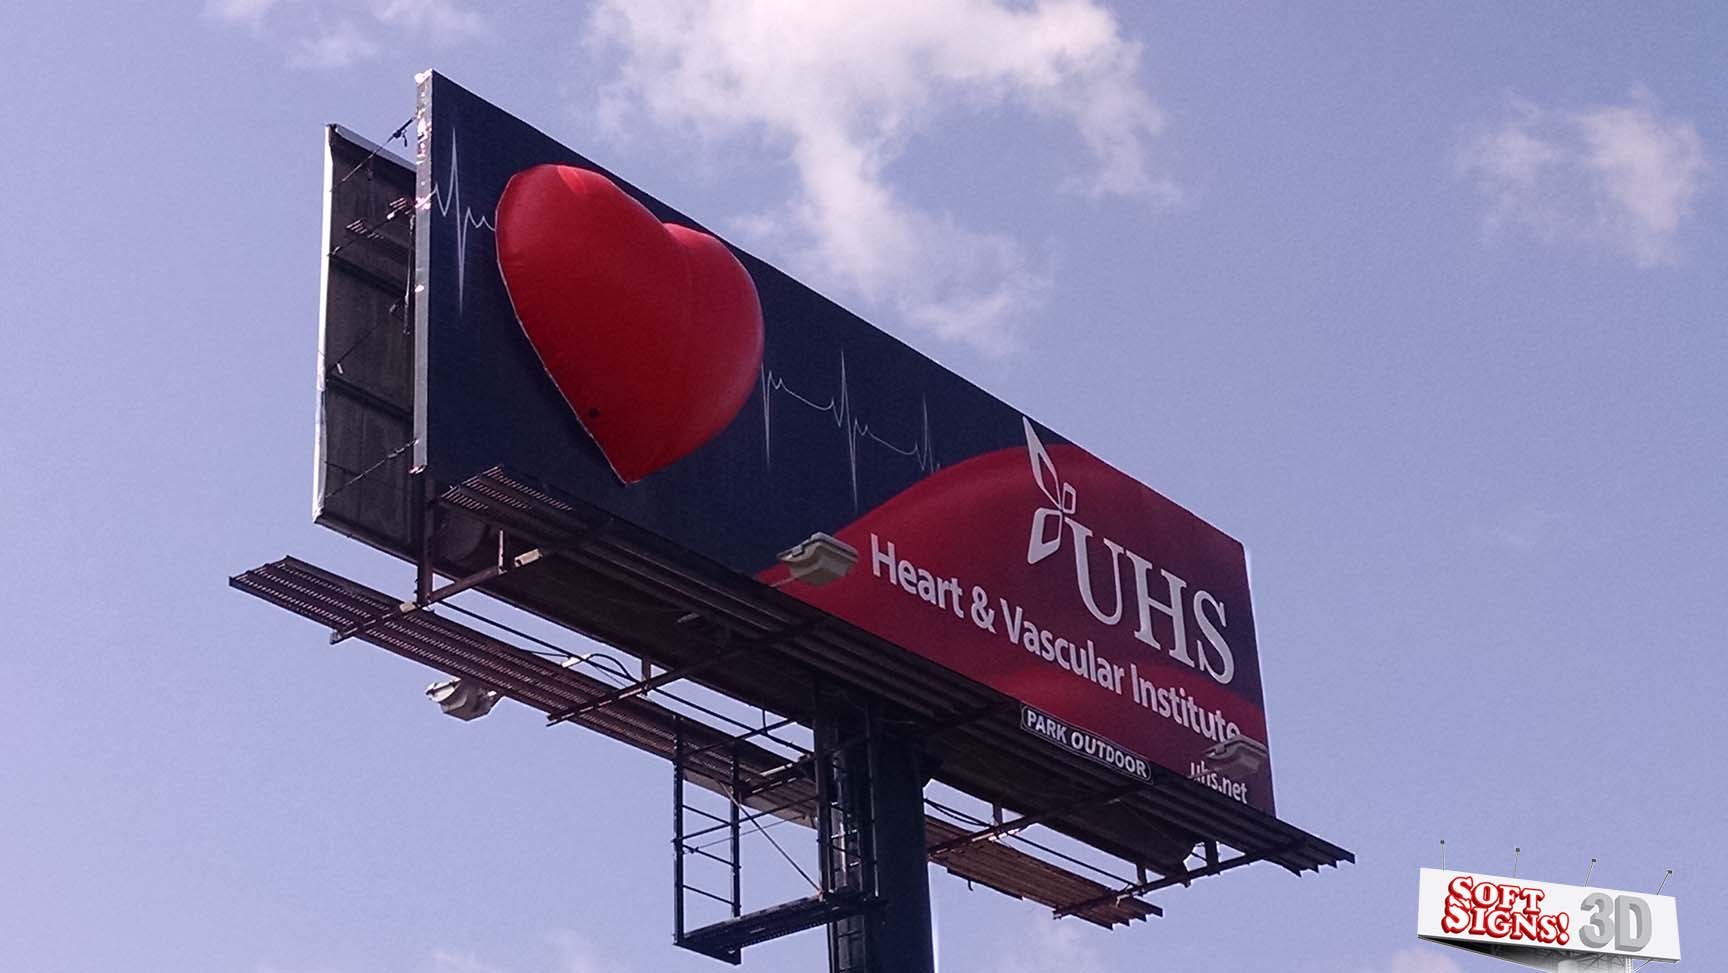 UHS Heart by Soft Signs 3D